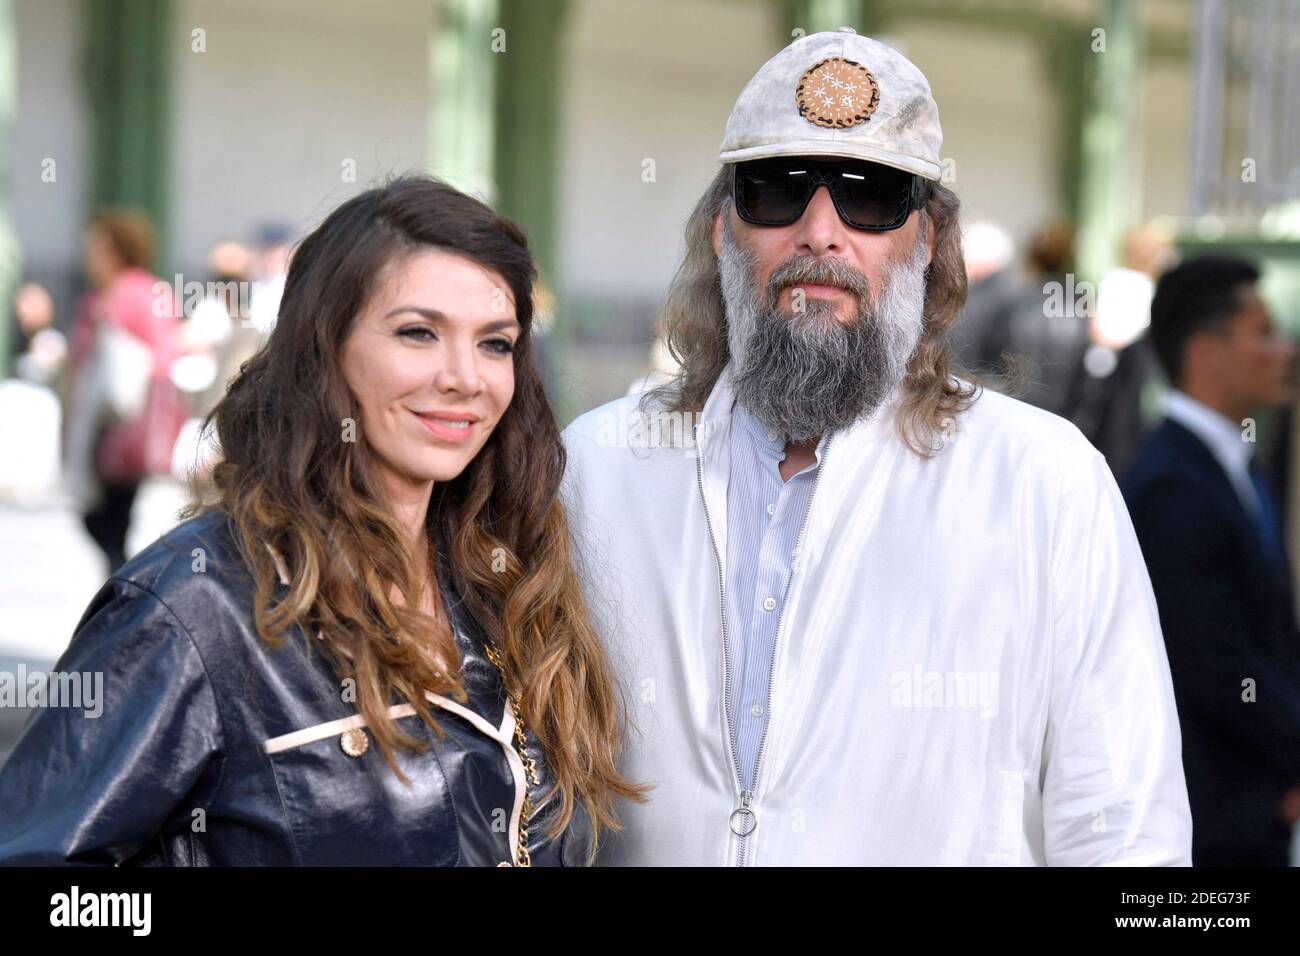 Amandine de la Richardiere and Sebastien Tellier attending the Chanel  Cruise Collection 2020 Photocall at the Grand Palais in Paris, France on  May 03, 2019. Photo by Aurore Marechal/ABACAPRESS.COM Stock Photo - Alamy